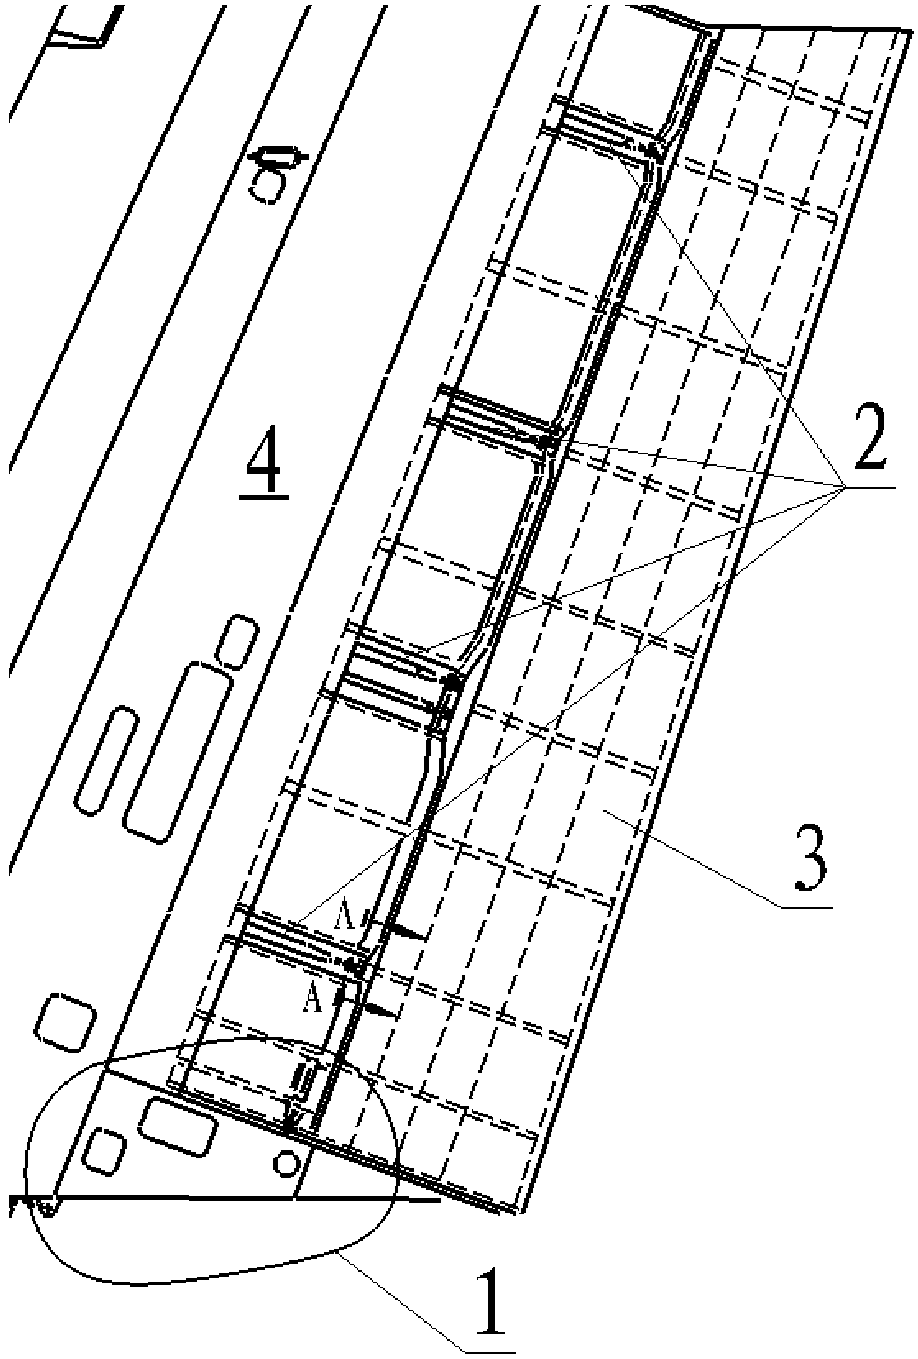 Suspension structure of control surface of large aircraft